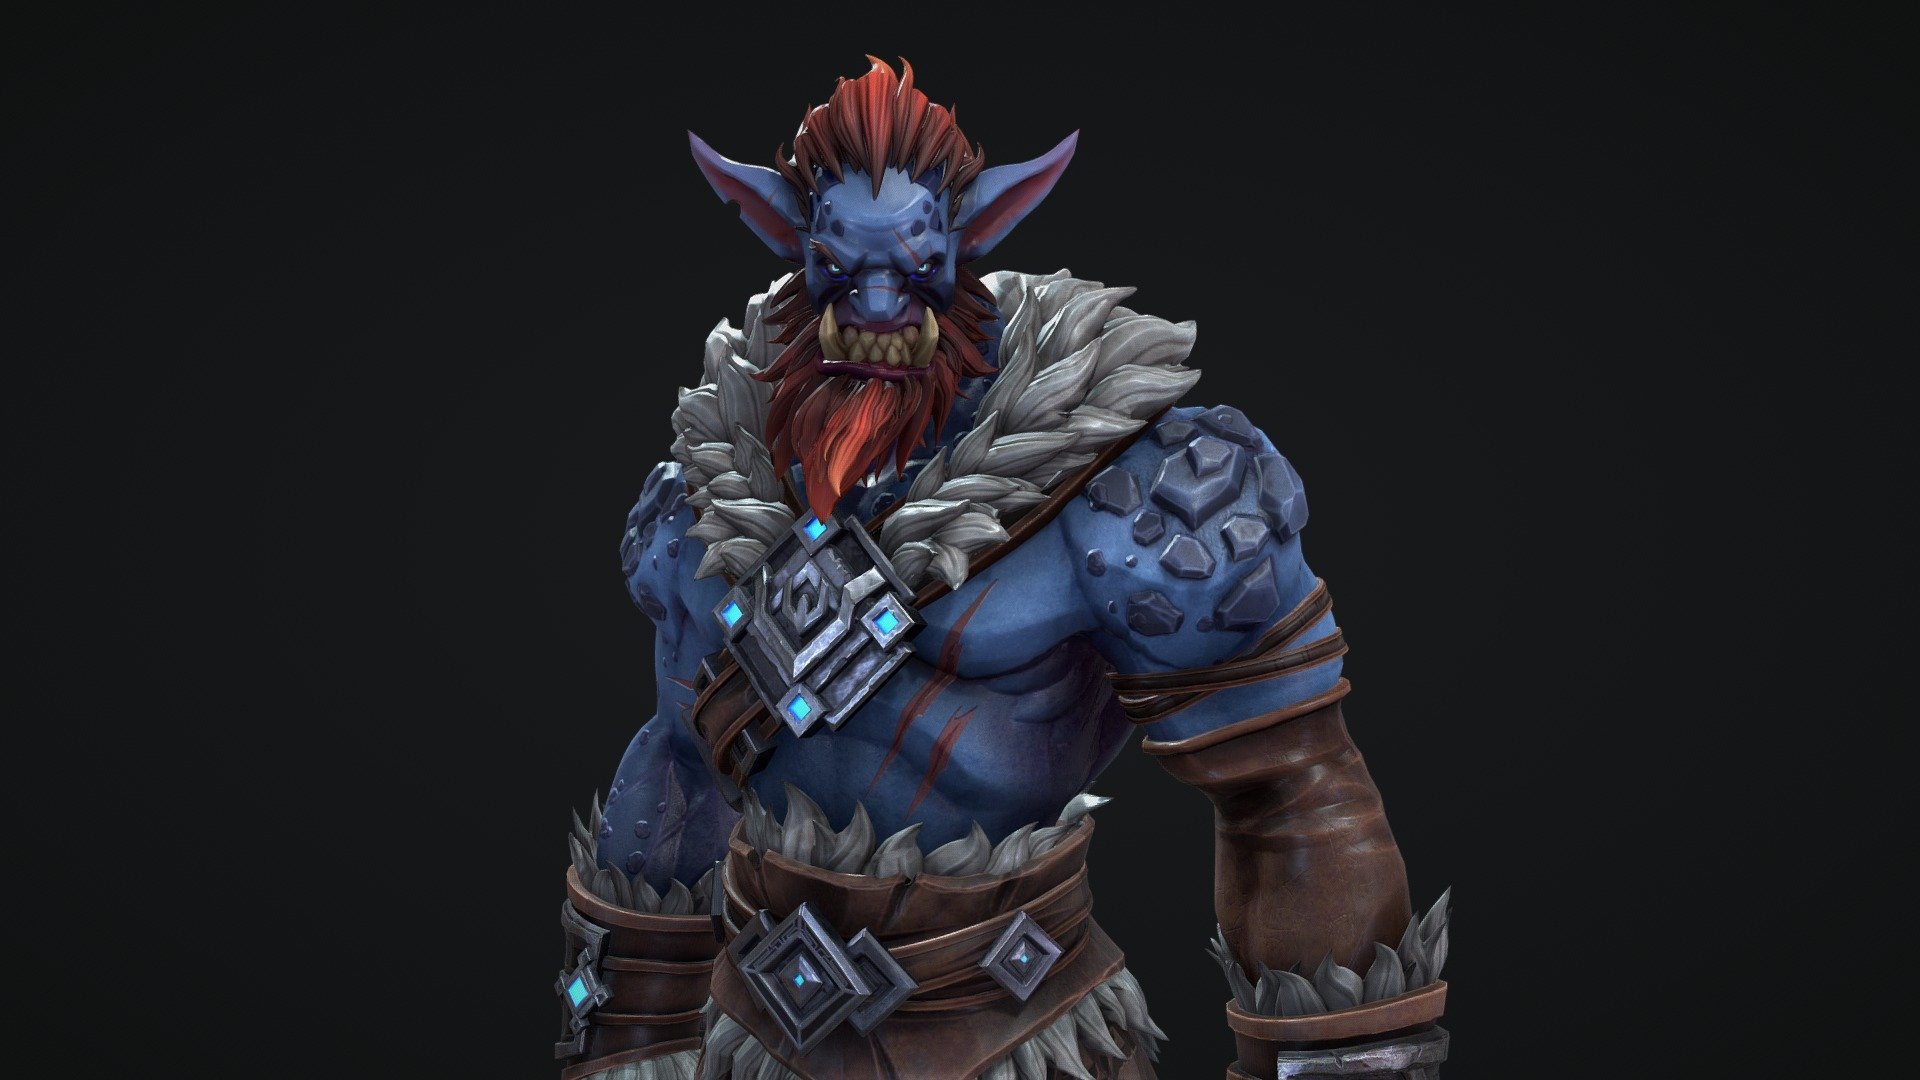 Inspired from the frost trolls in the runeterra universe by Riot. Added a few extra loops here and there but without them the character is around the 85k mark 3d model